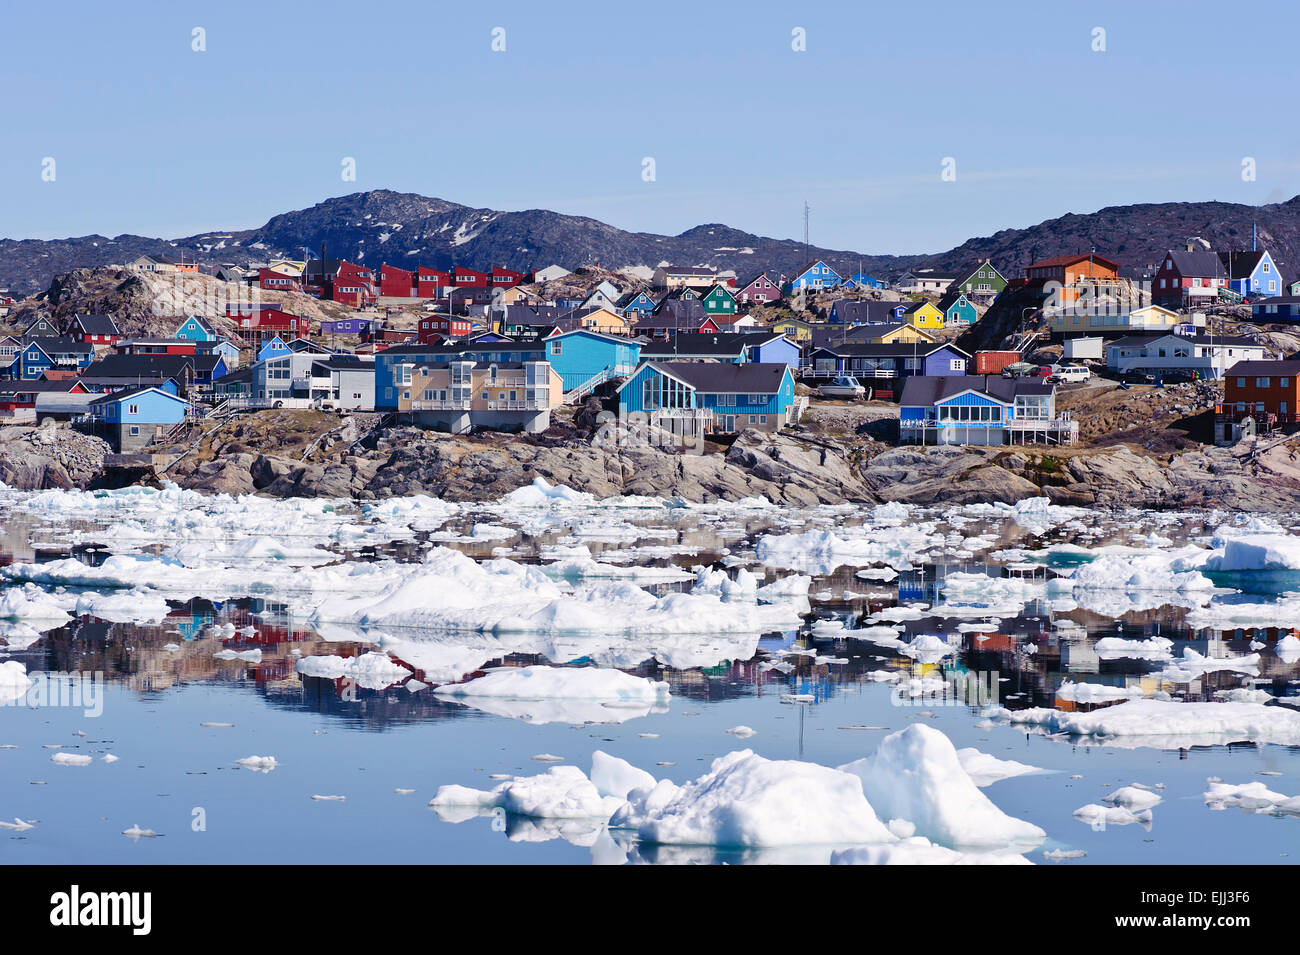 ILLULISAT, QAASUITSUP / GREENLAND - JUNE 17:  view from the sea of Illulisat, Greenland, on 27th June, 2013 Stock Photo